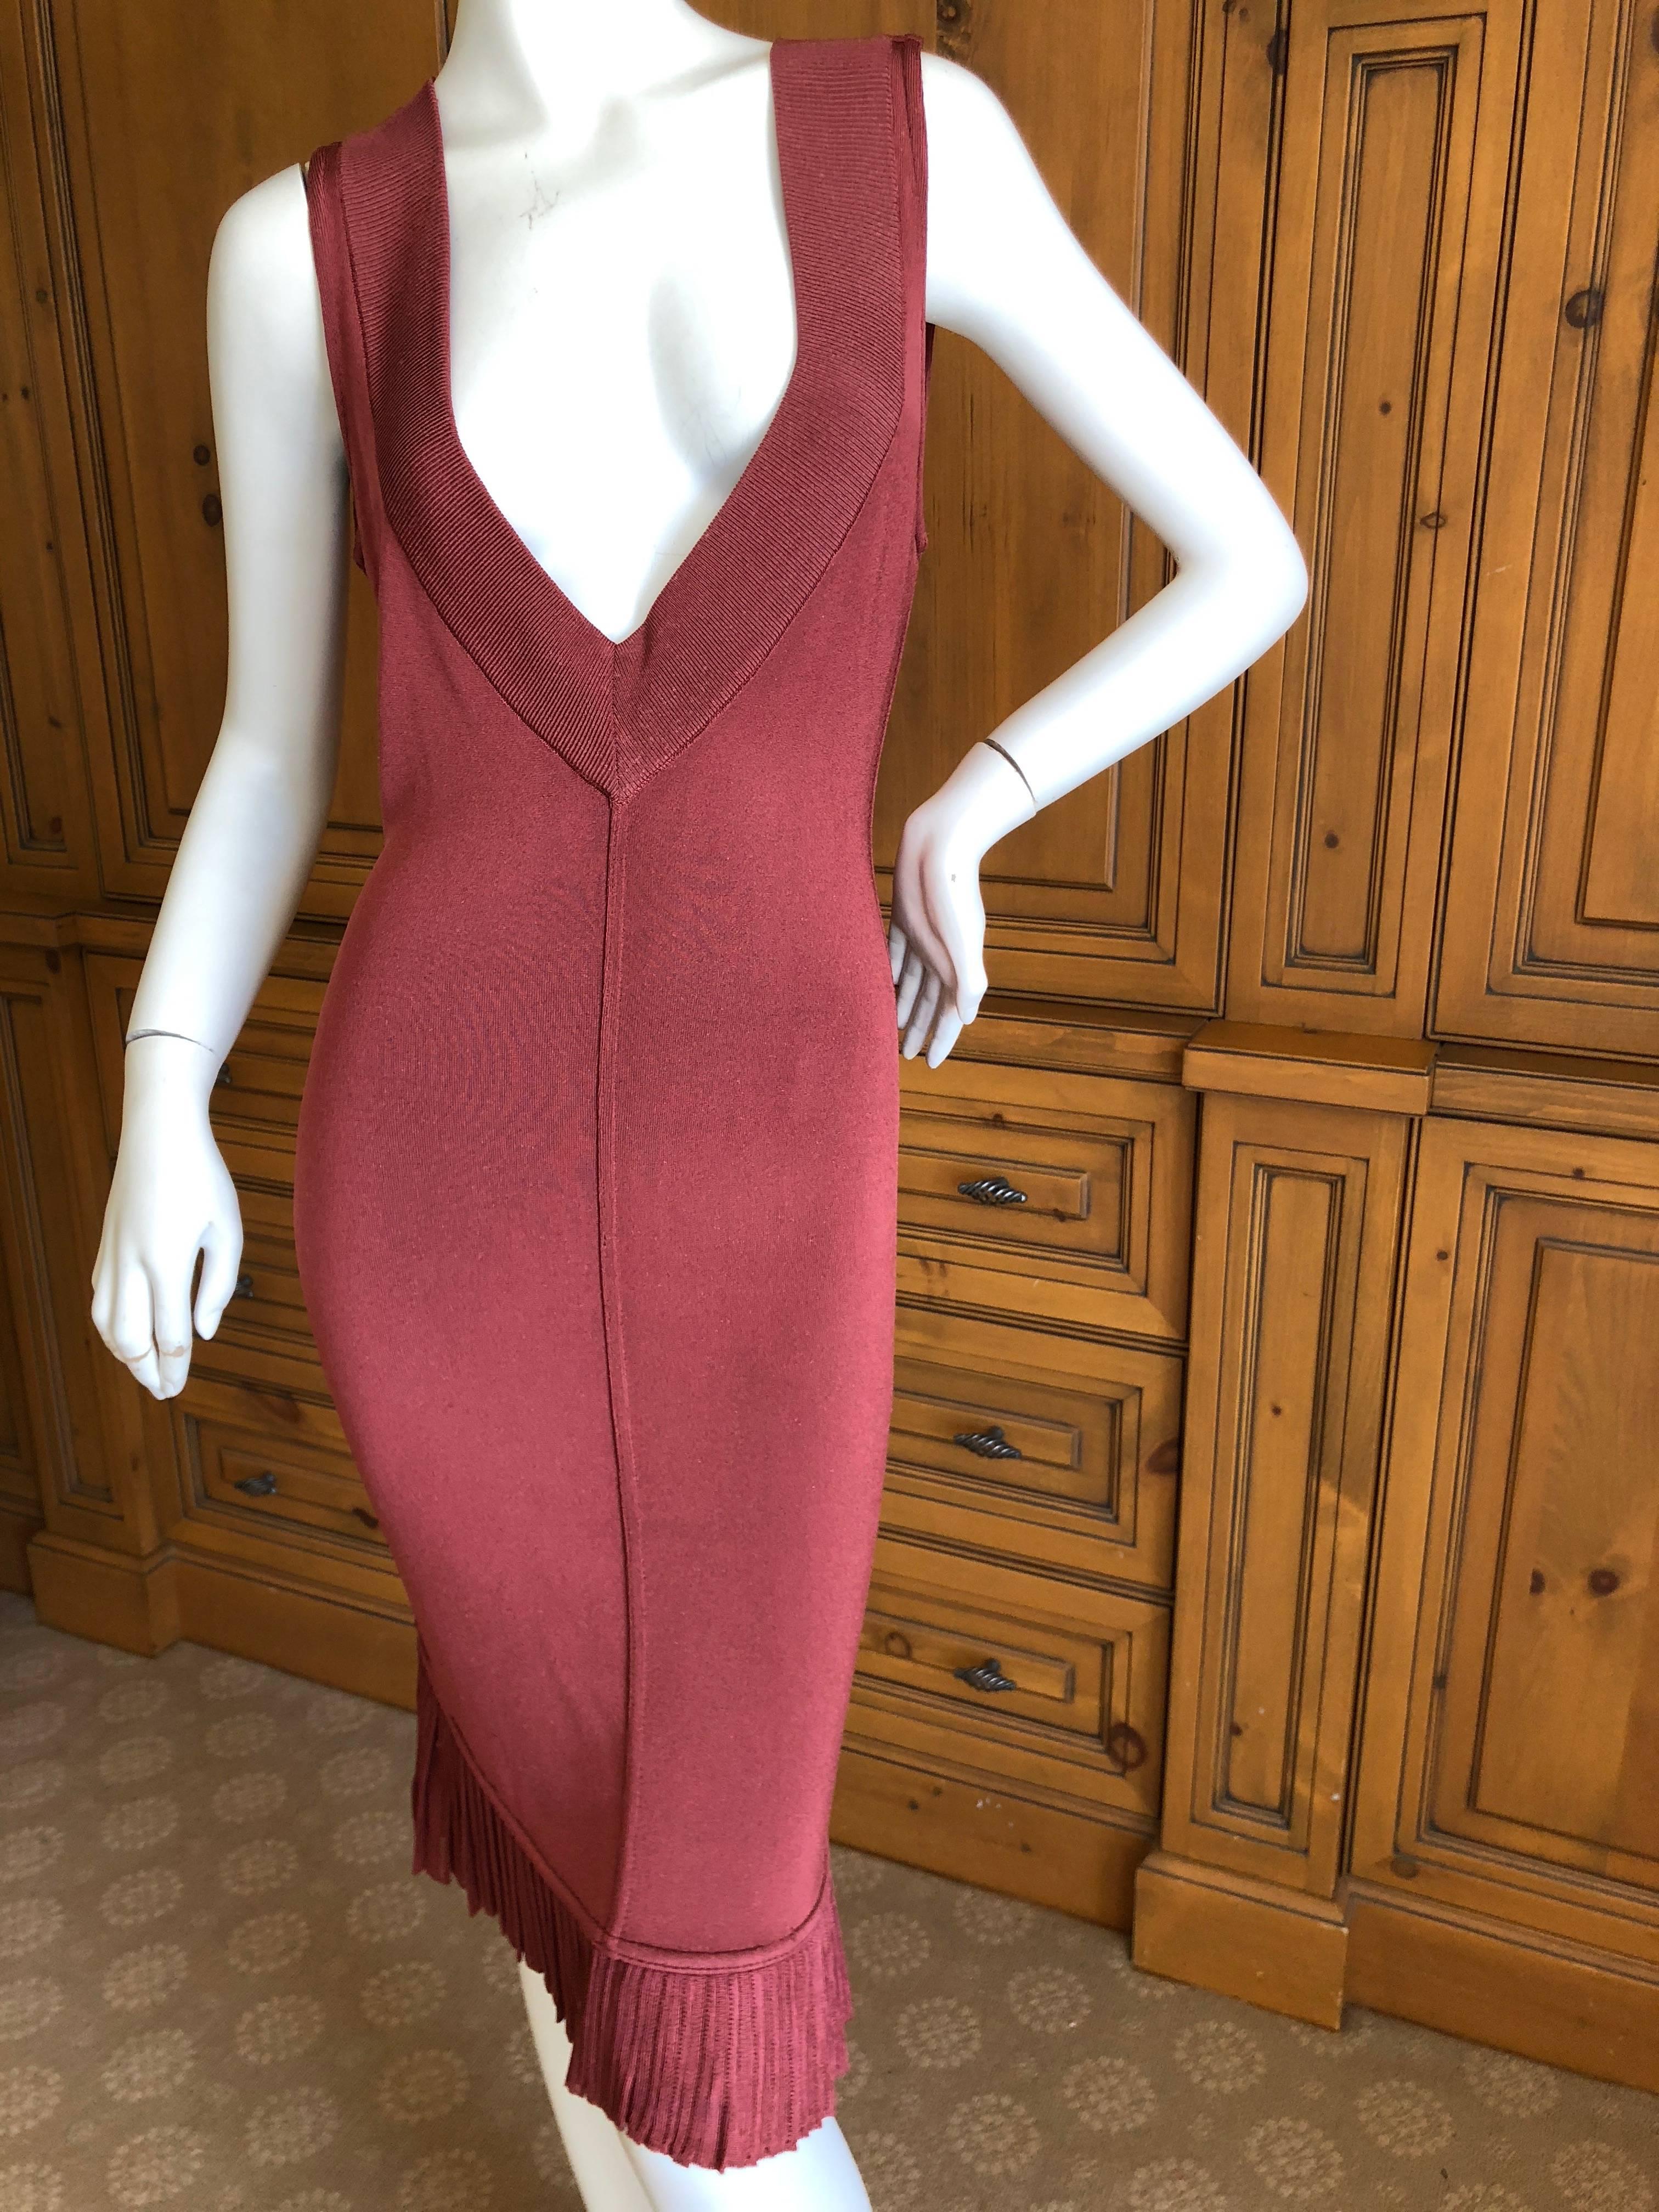 Azzedine Alaia Vintage  Supersexy Low Cut Coral Dress with Fishtail Back 
  There is  a lot of stretch, measured lying flat.
There are two Alaia's from this collector, both purchased in the eighties and never worn.
Please see all the great 80's